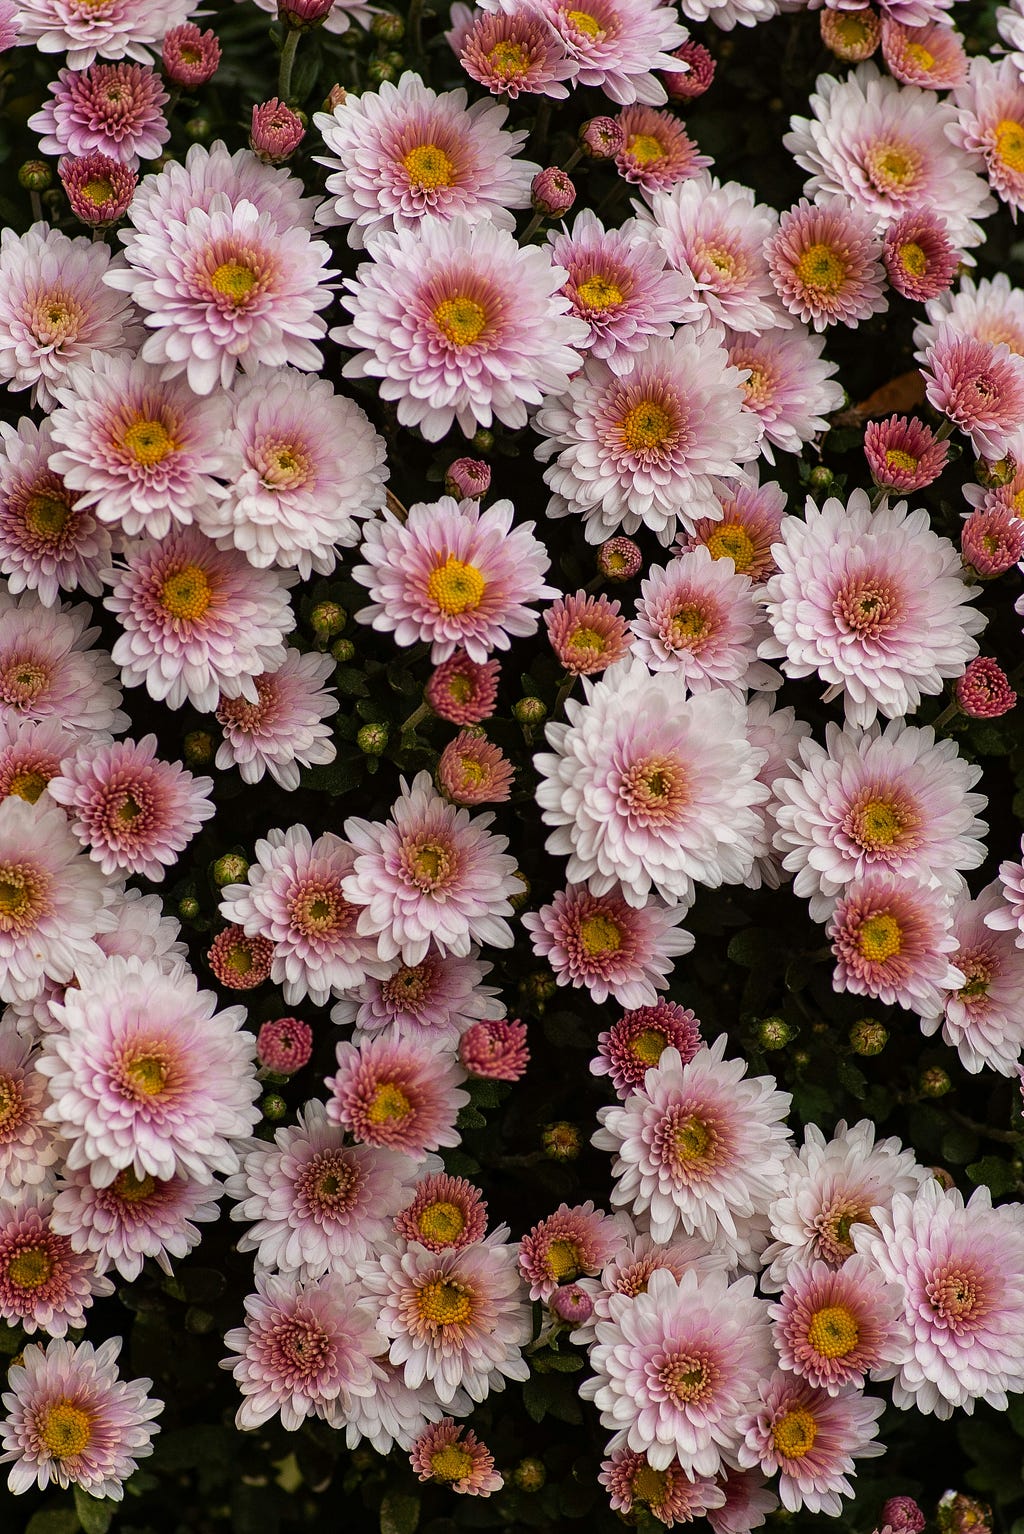 pink flowers with a yellow center thickly laid over the ground